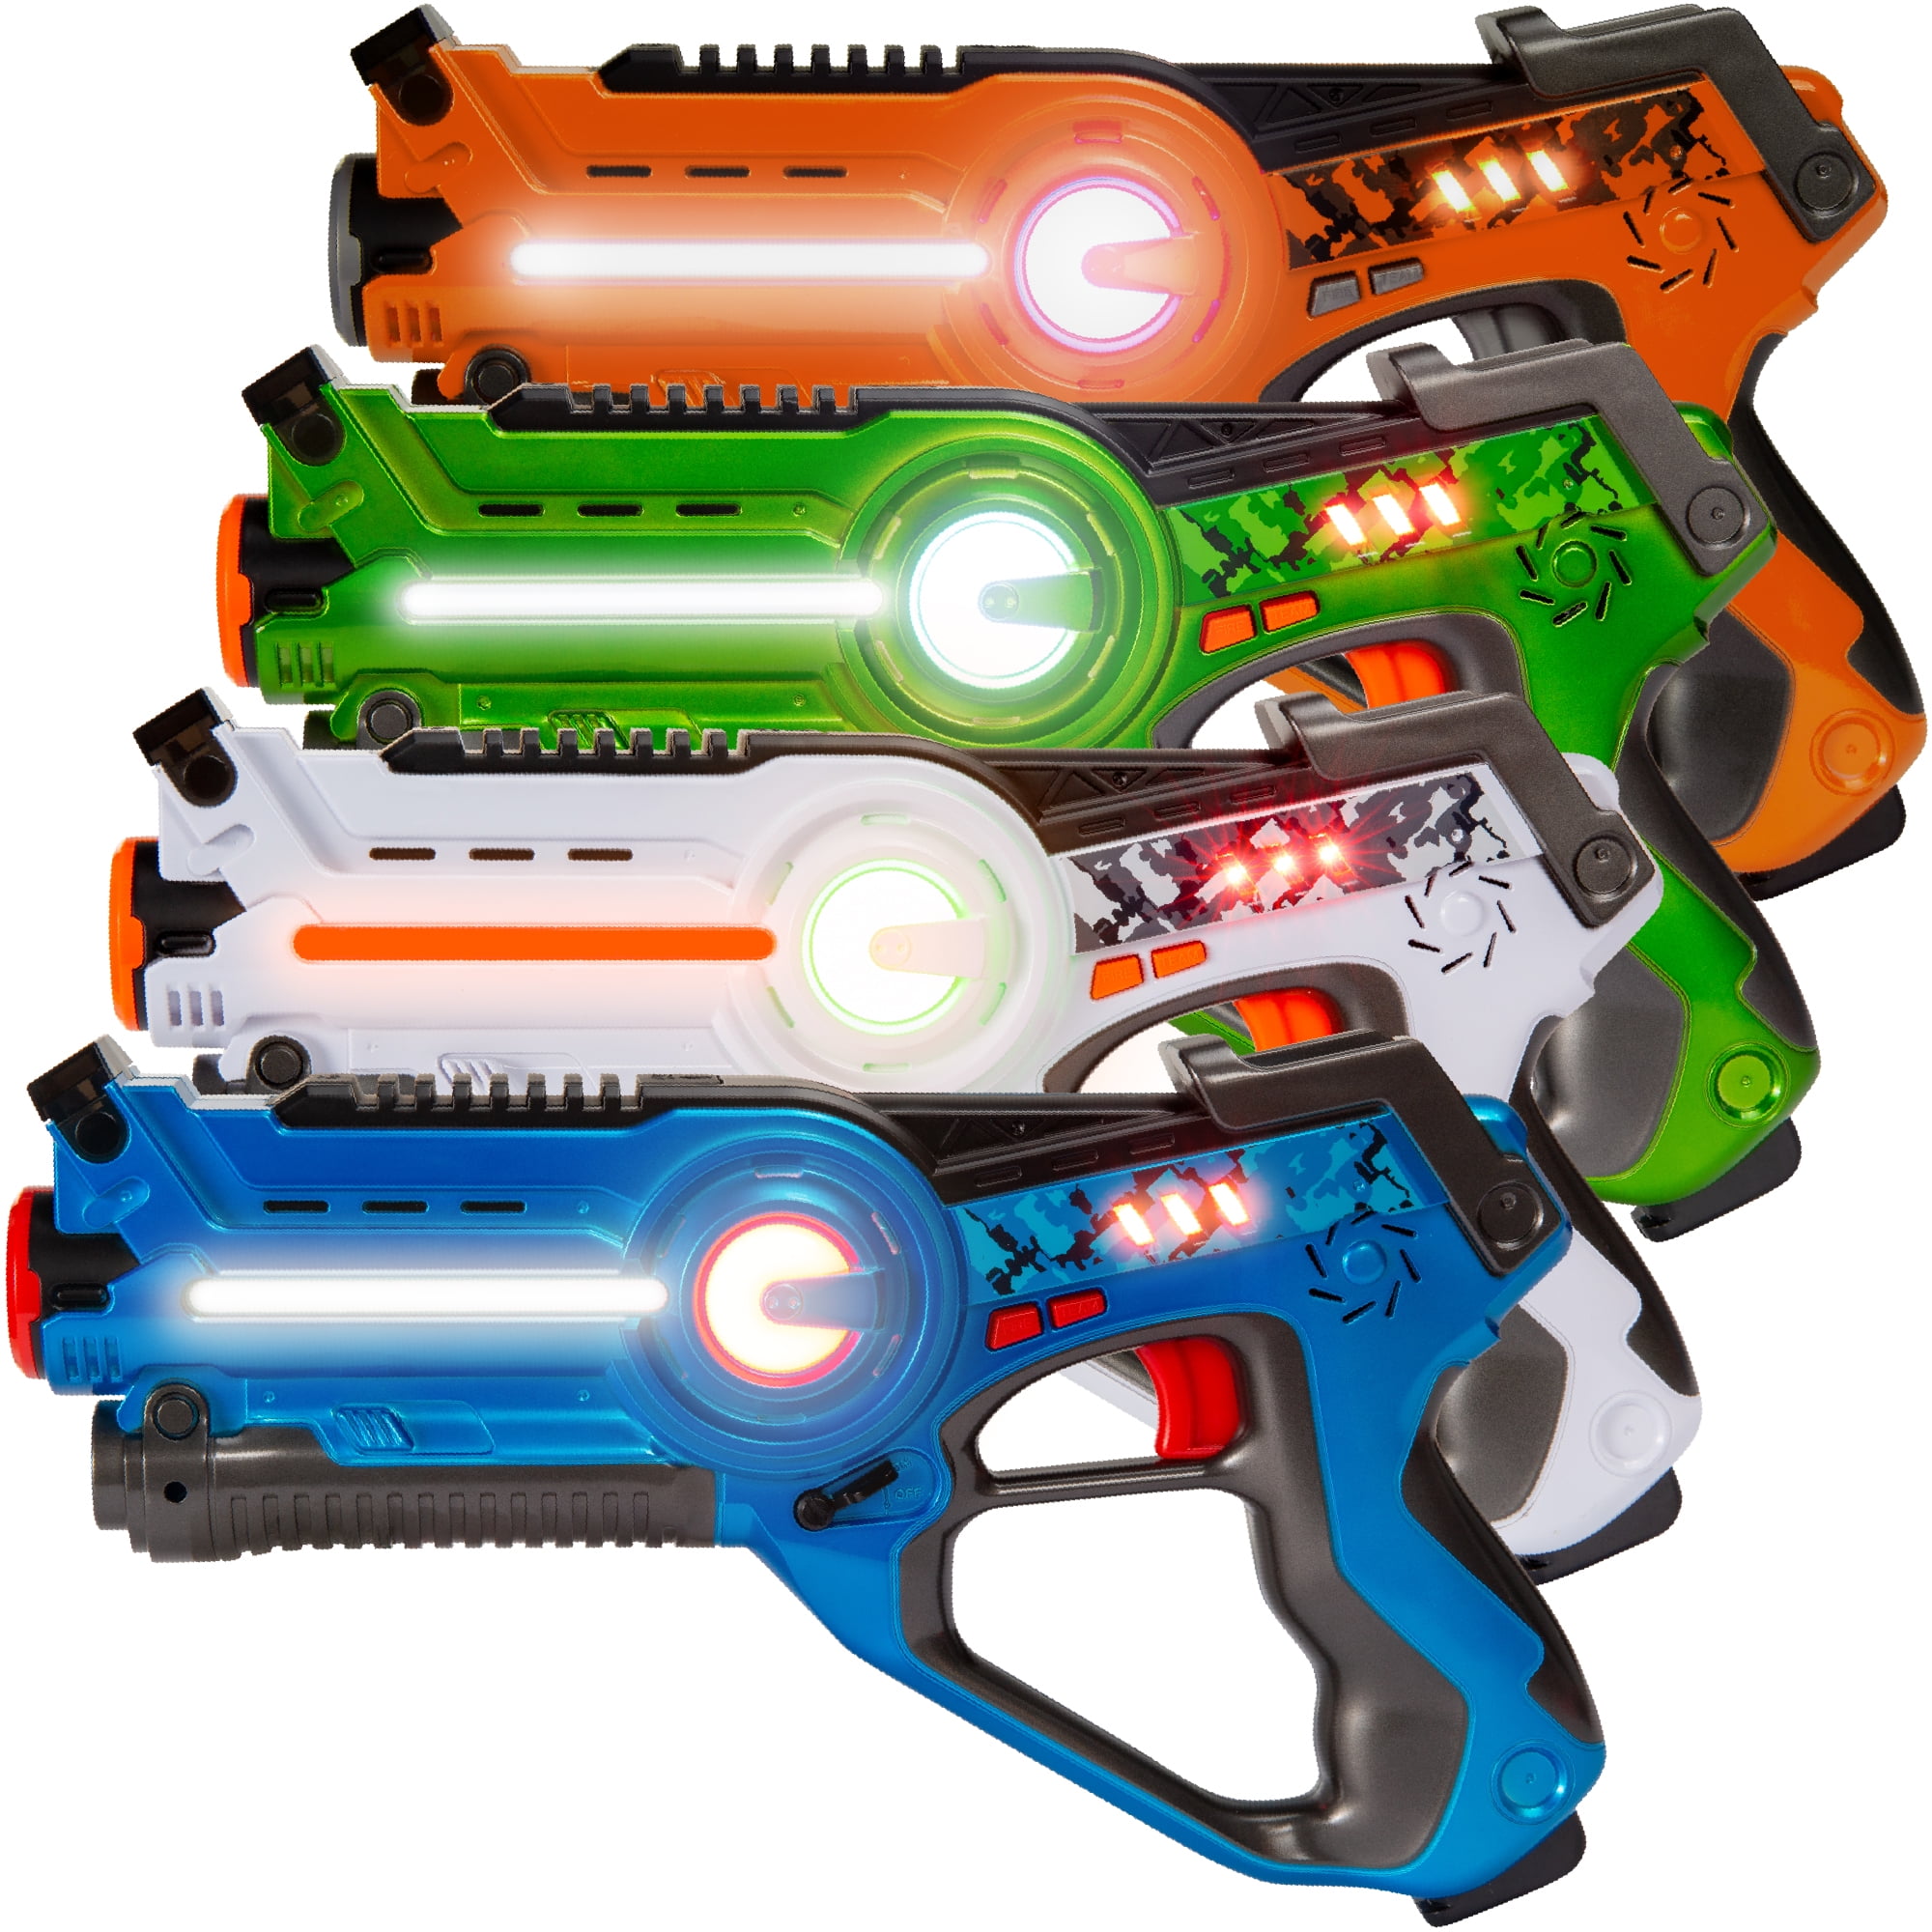 Go Outside and Play Recoil Laser Tag Mulitplayer Starter Set Indoor/Outdoor. 